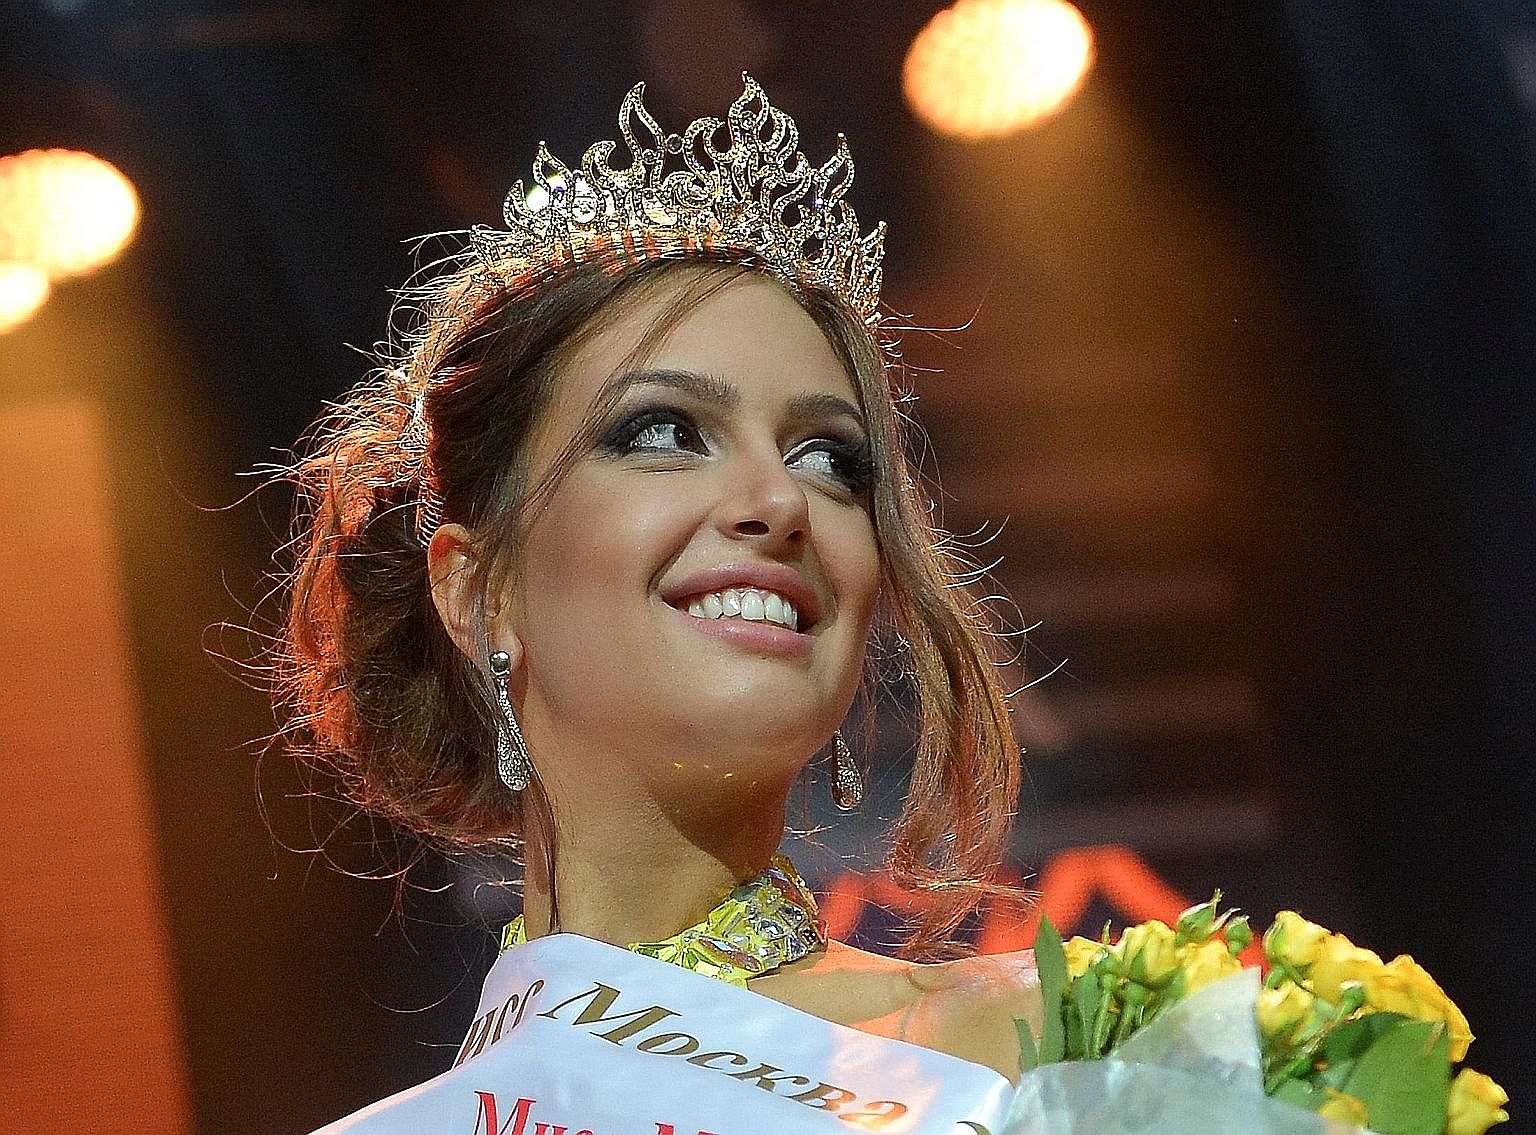 The proverbial straw that broke the camel's back was Sultan Muhammad V's secretive Nov 22 wedding to Russian beauty queen Oksana Voevodina (above).